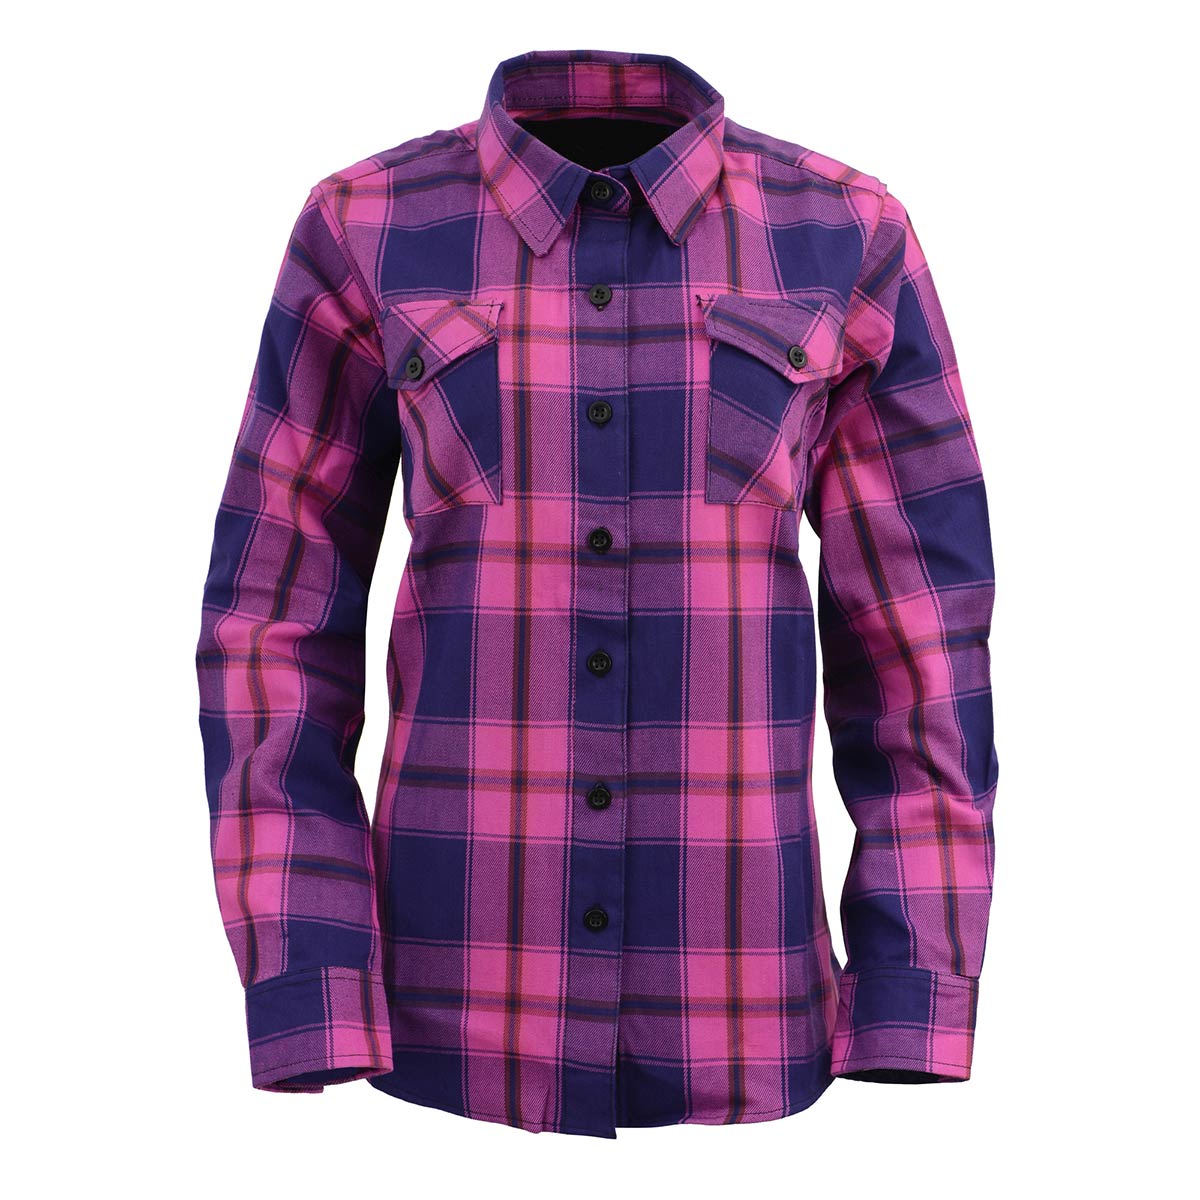 Women's Pink, Blue and Maroon Long Sleeve Cotton Flannel Shirt